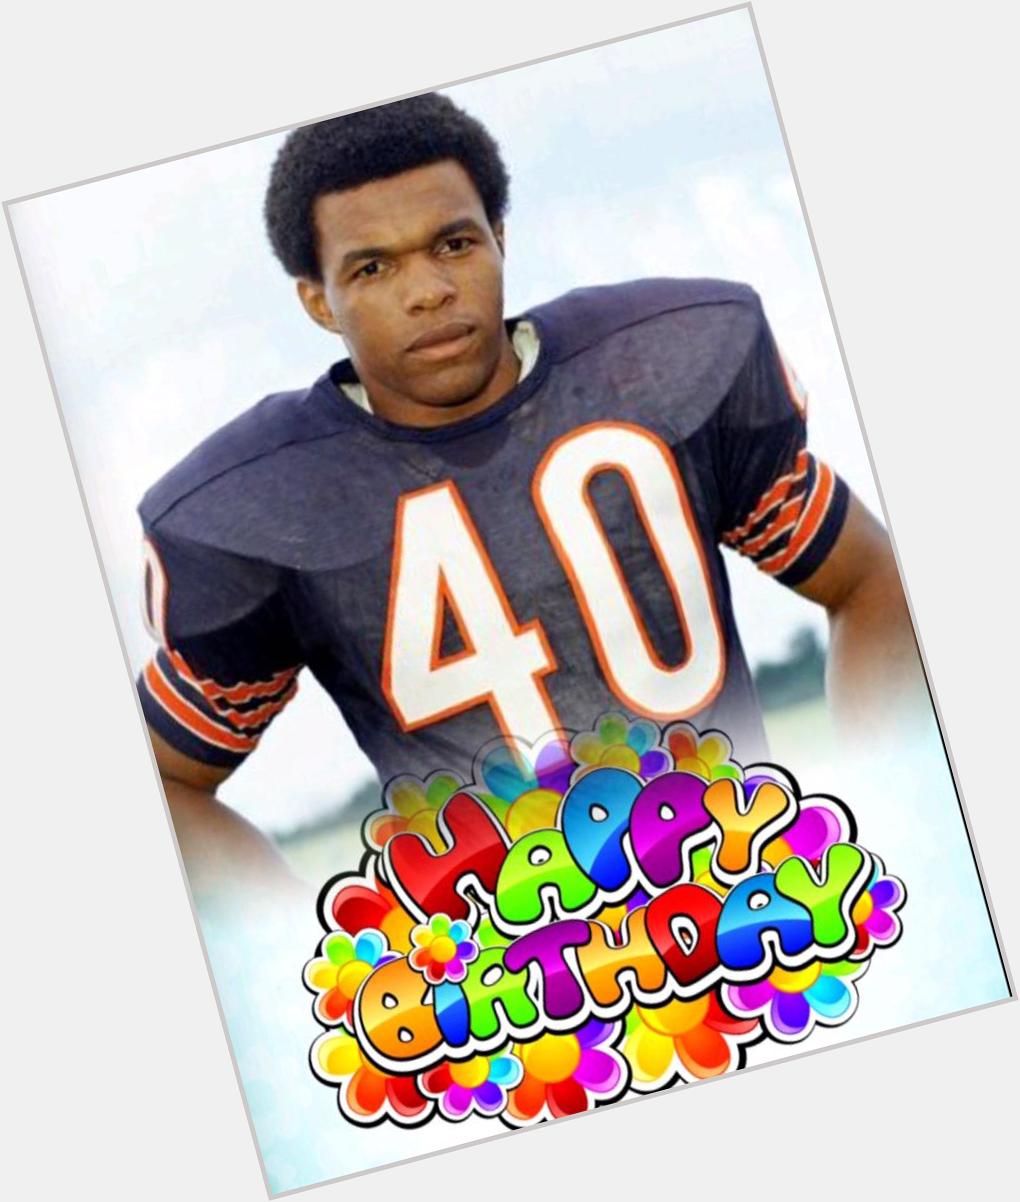 Happy Birthday Gale Sayers! Too bad his career was cut short by injury but he still made four pro bowls! 